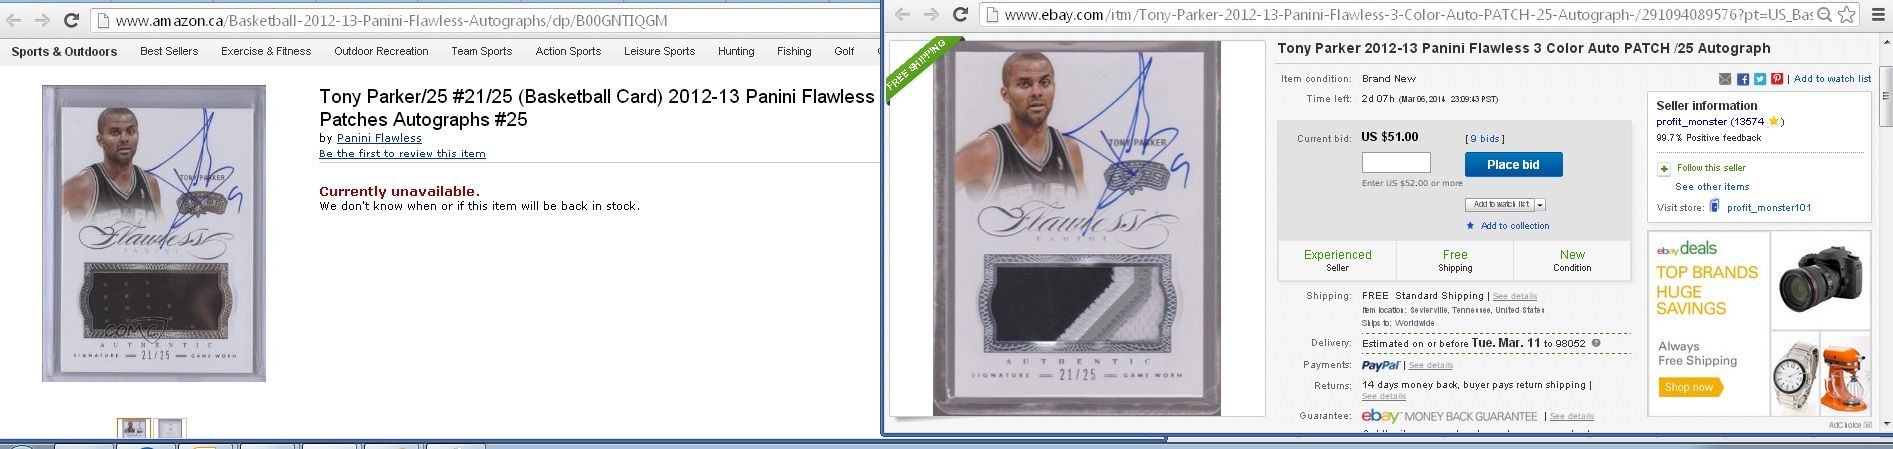 FakeParkerFlawlessautopatch21of25_zps8dc6c2dc.jpg